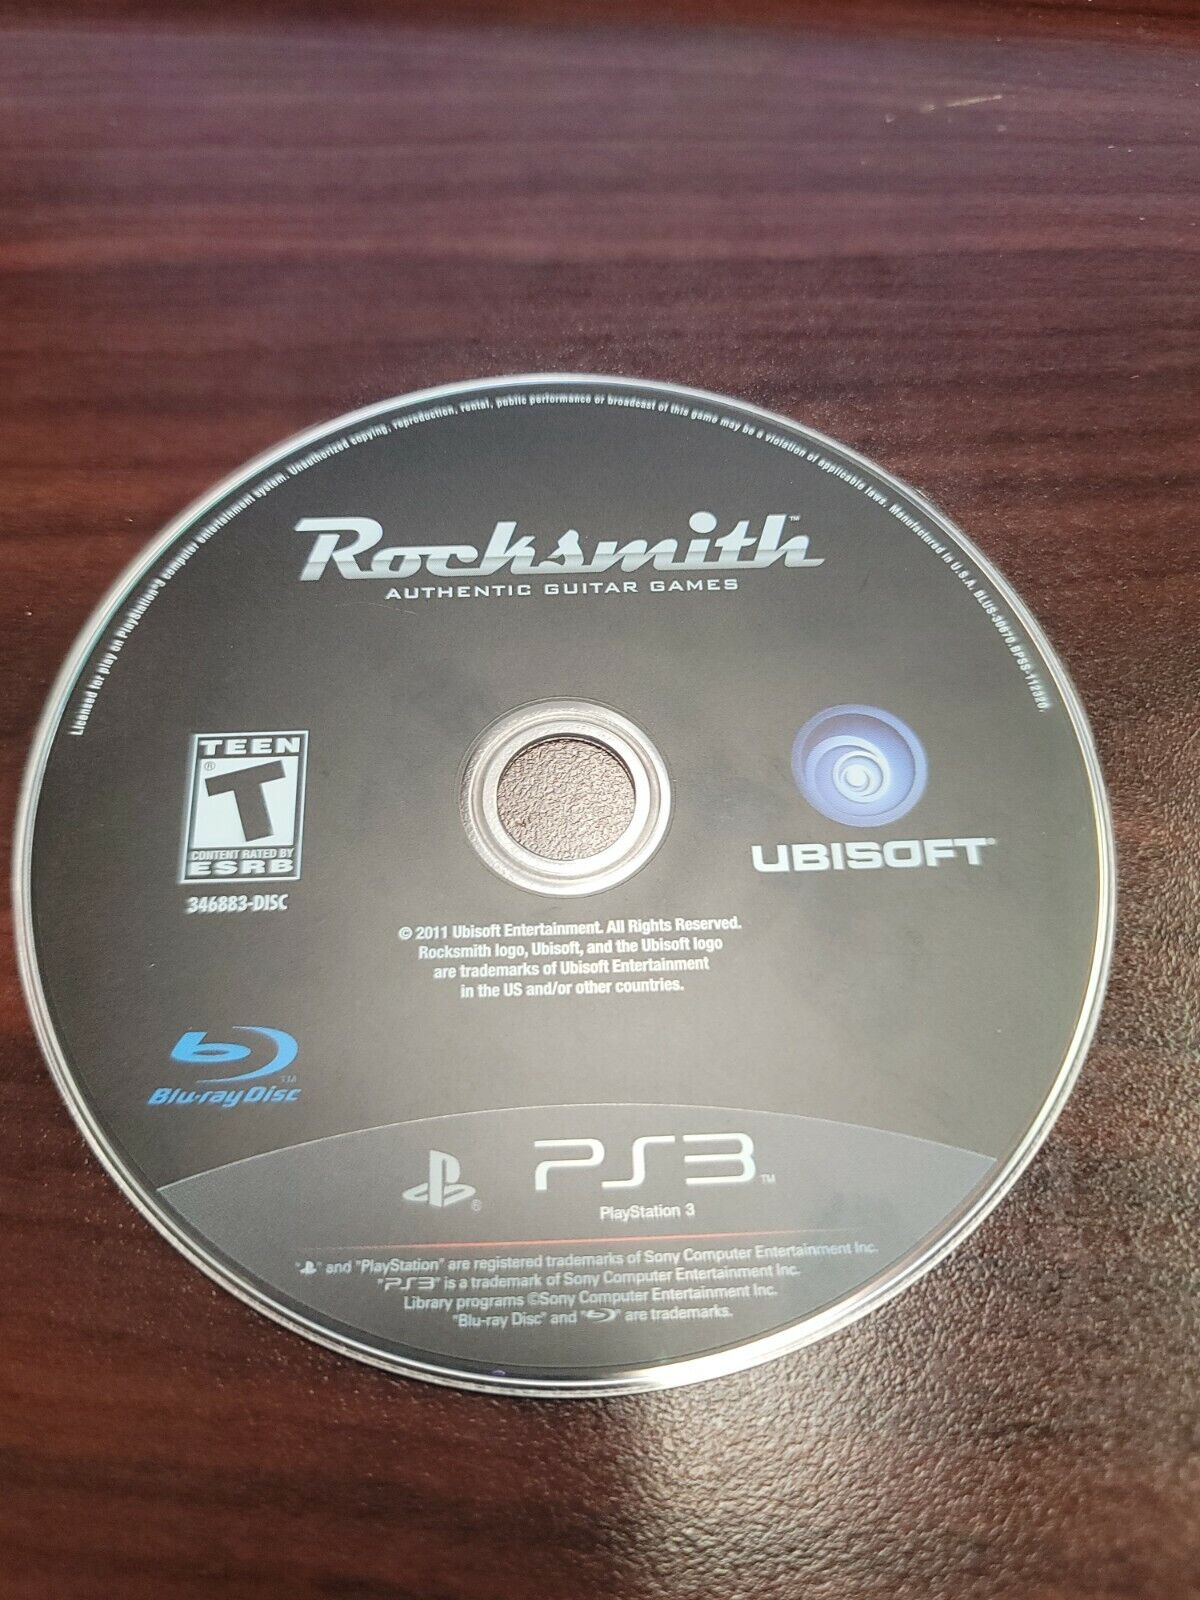 Rocksmith Authentic Guitar Games (PlayStation 3) - image 1 of 11